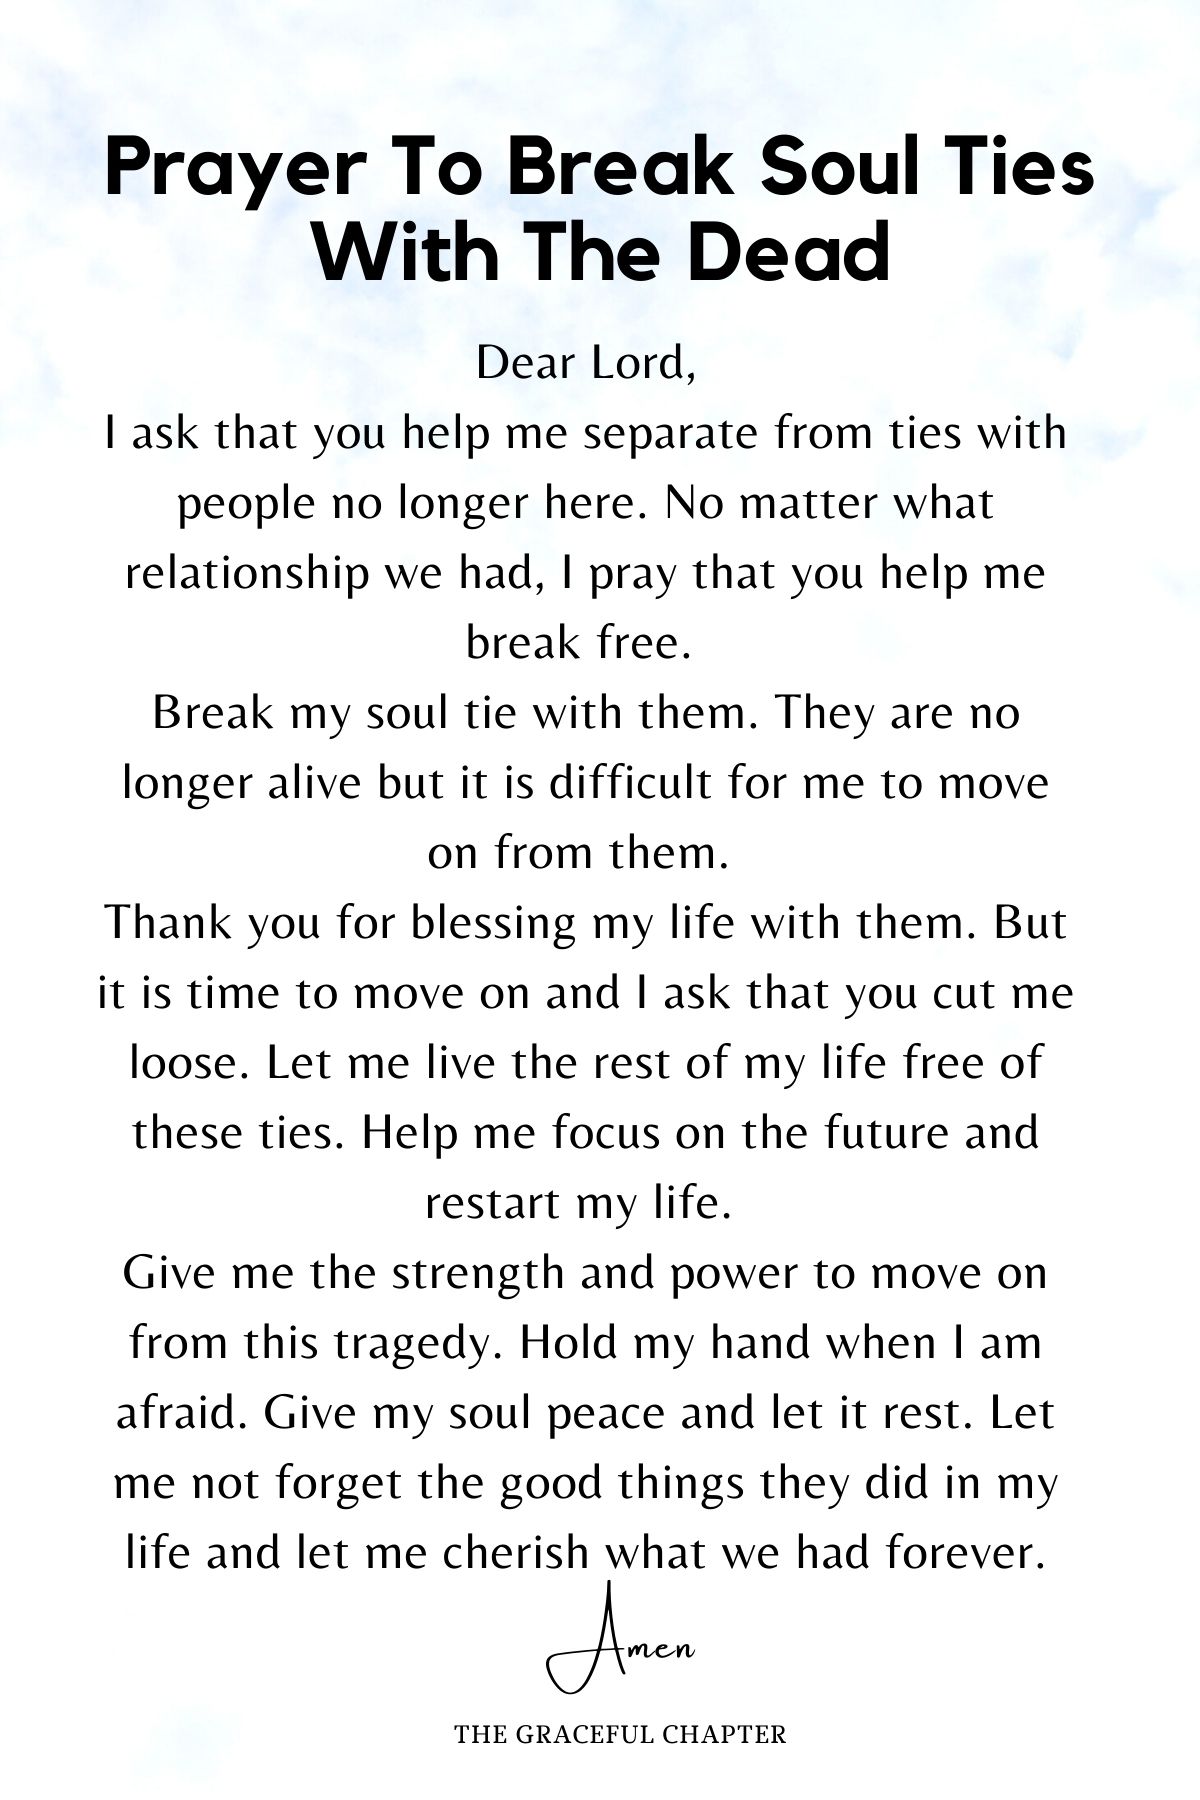 Prayer to break soul ties with the dead